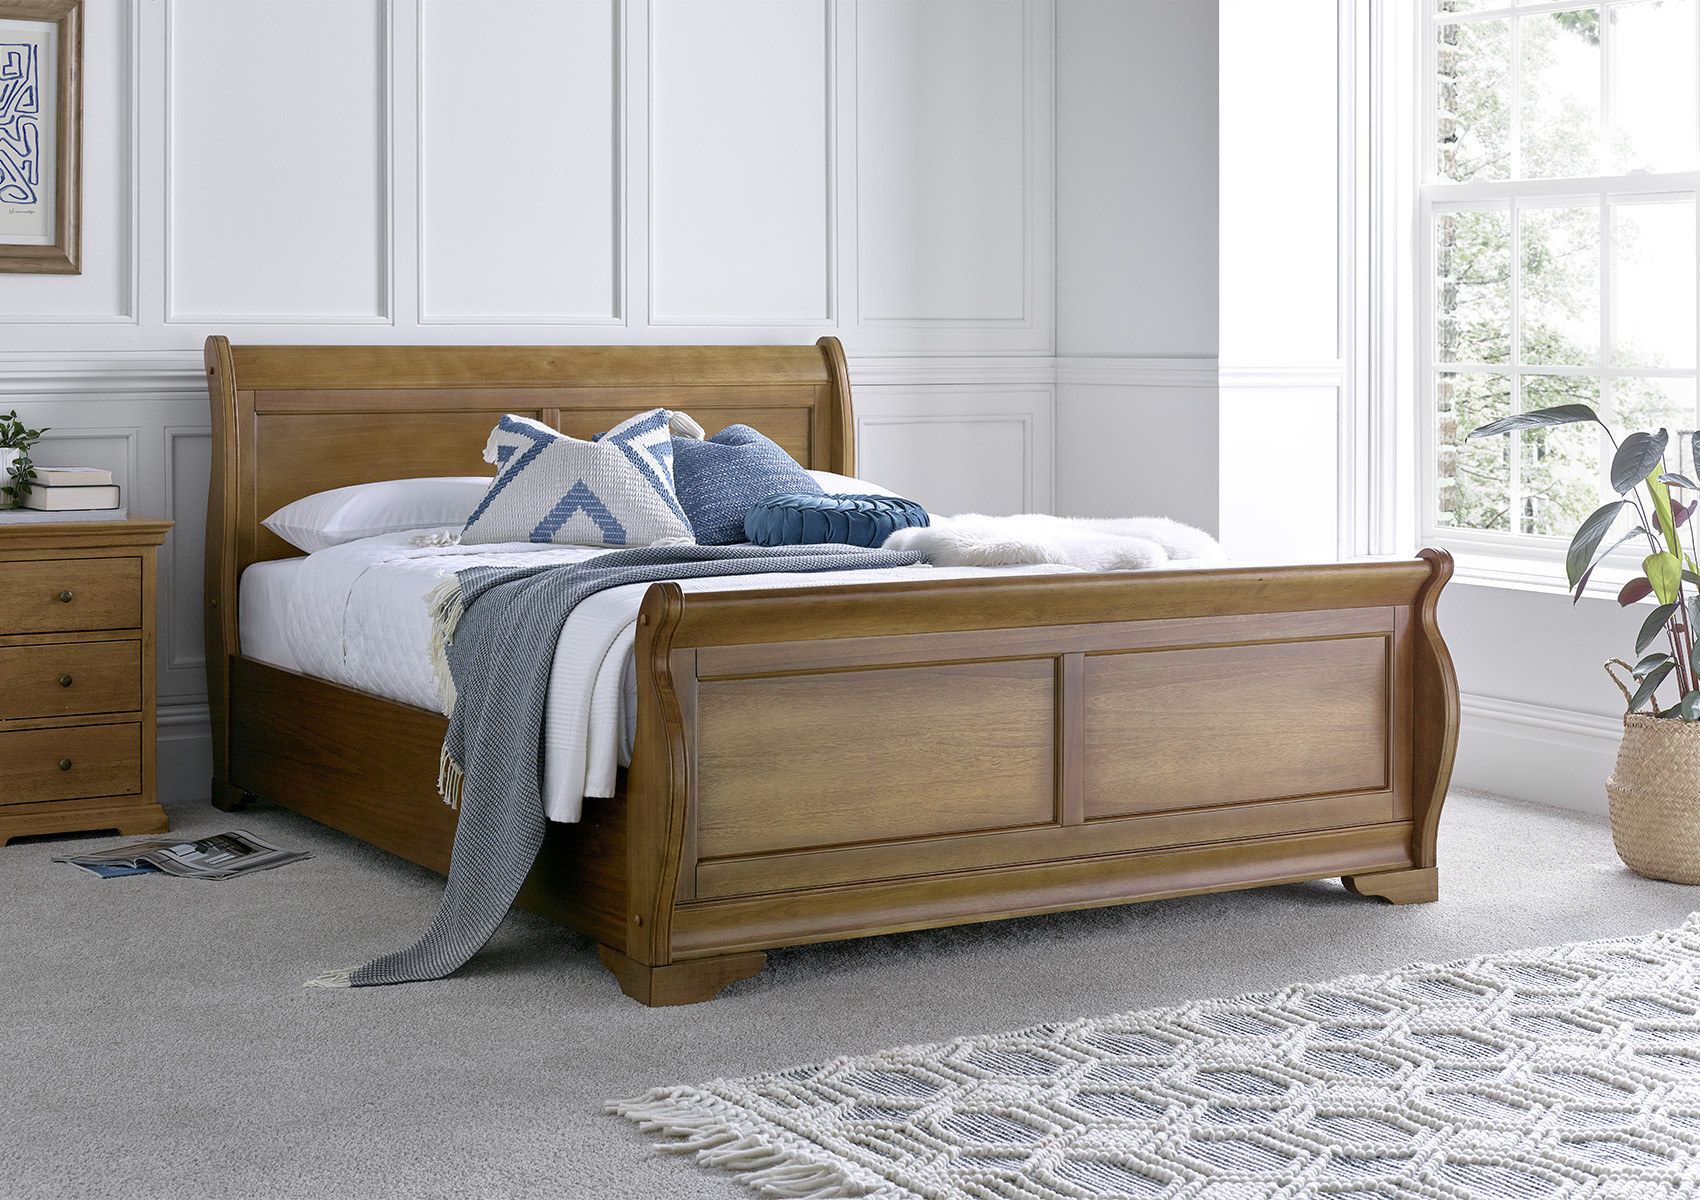 View Toulon Wooden Sleigh Bed Oak Finish Bed Frame Only Time4Sleep information